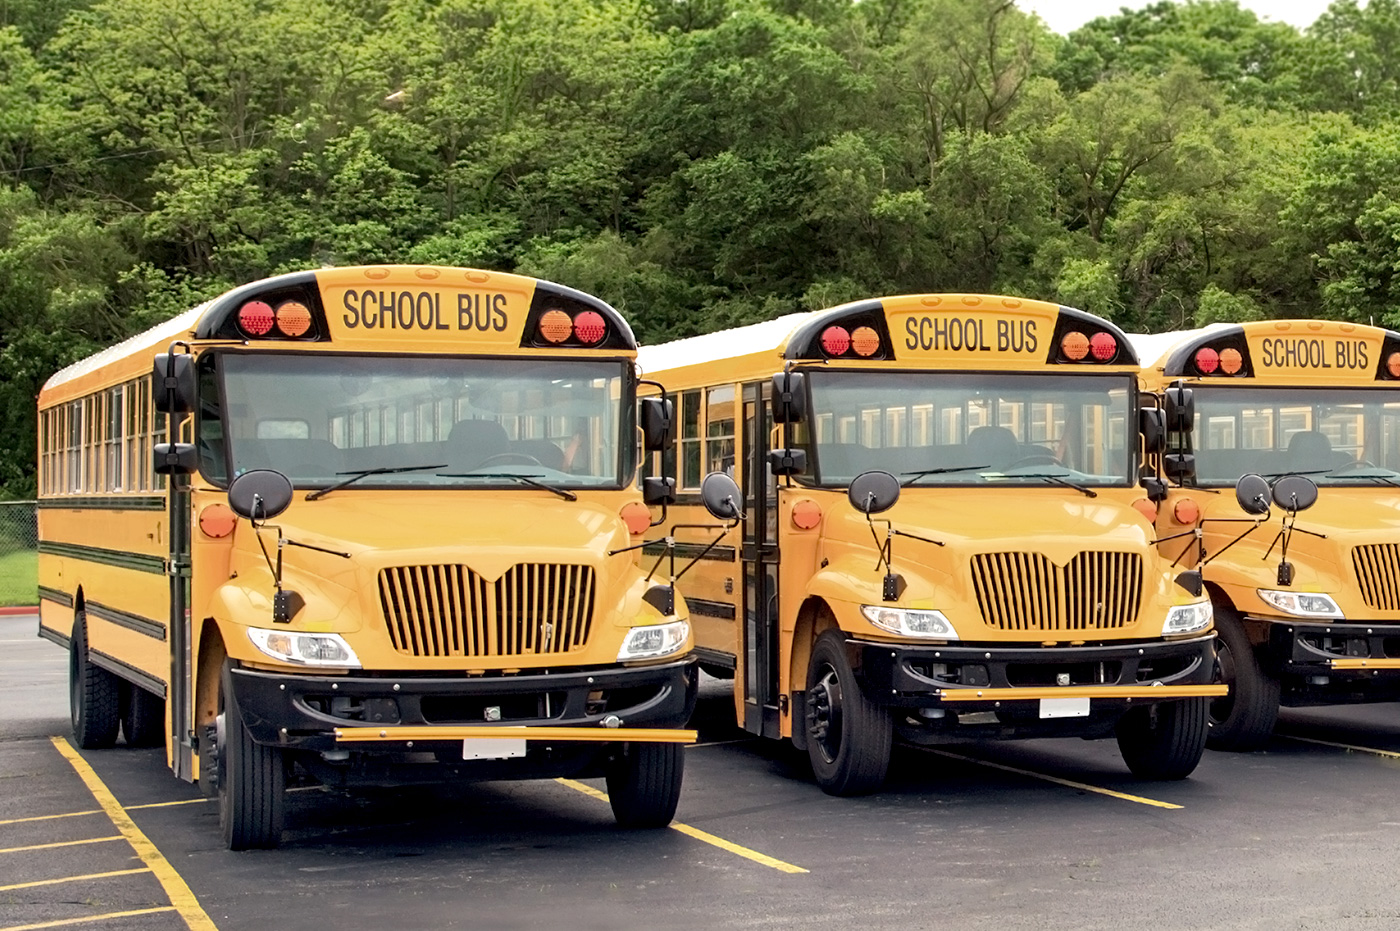 Three schoolbuses parked side by side in a parking lot.